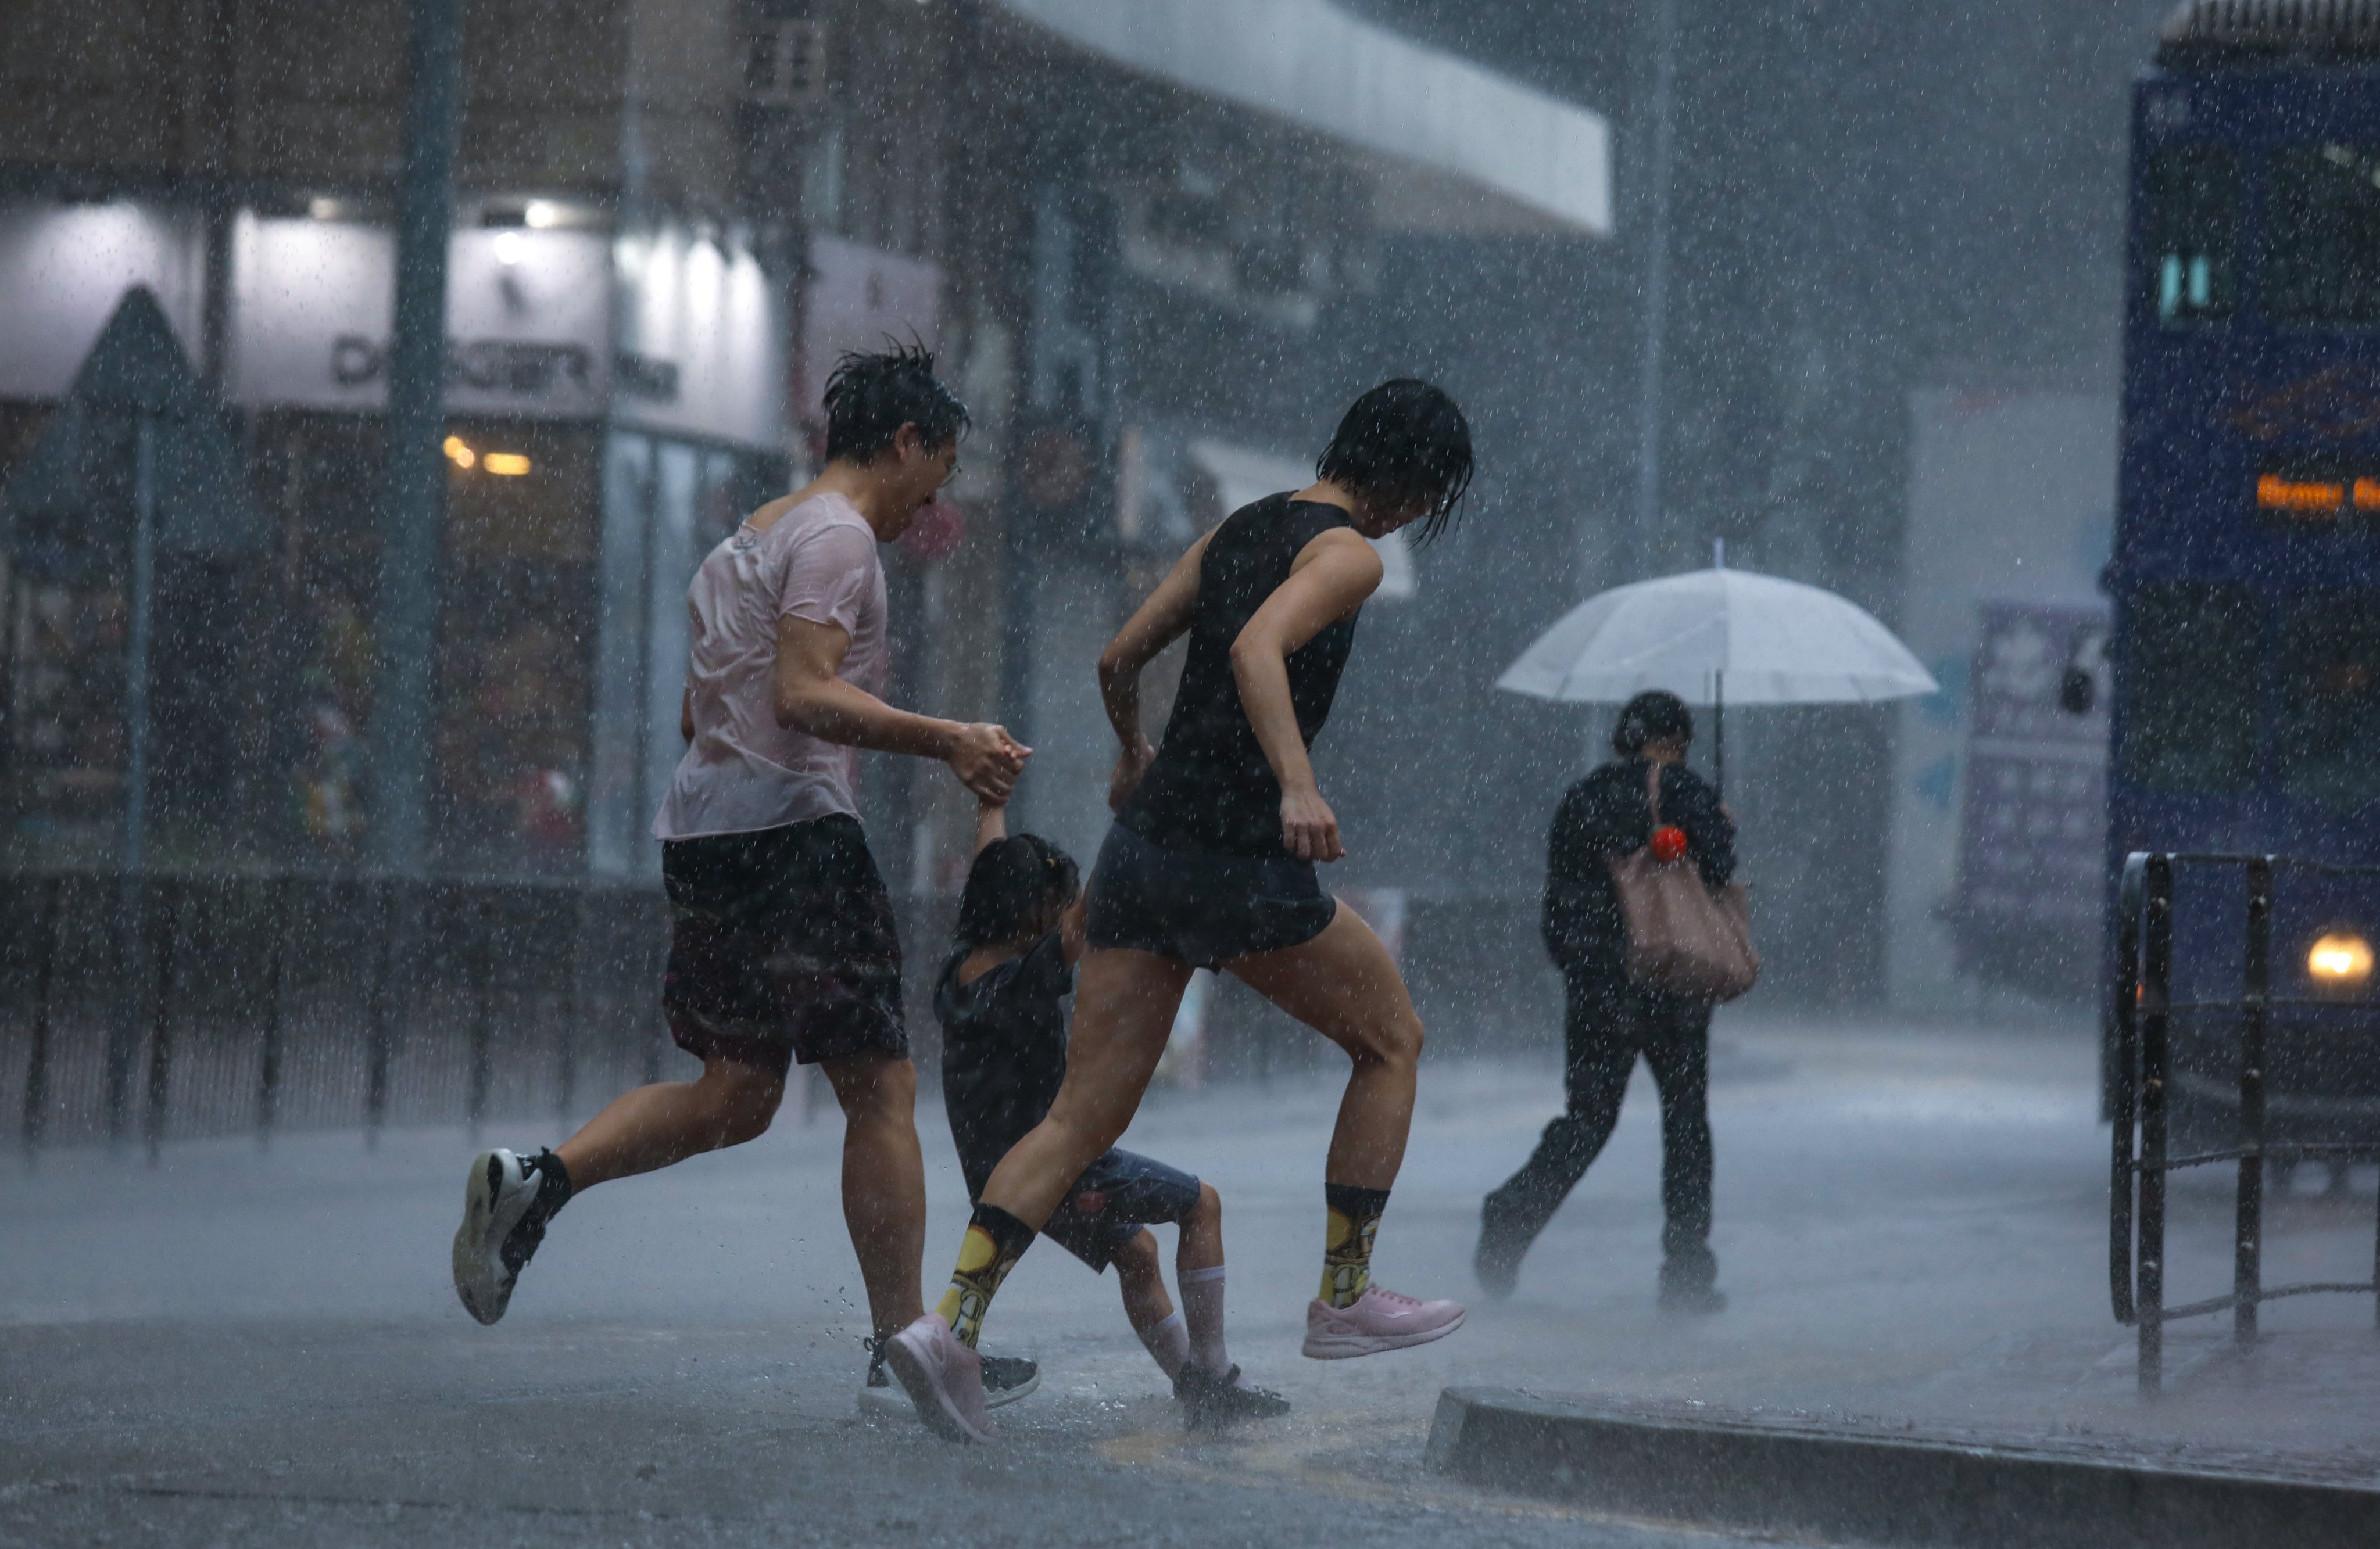 An amber rainstorm signal means that heavy rain has fallen or is expected to fall generally over Hong Kong, exceeding 30mm in an hour, and will likely continue. Photo: Xiaomei Chen